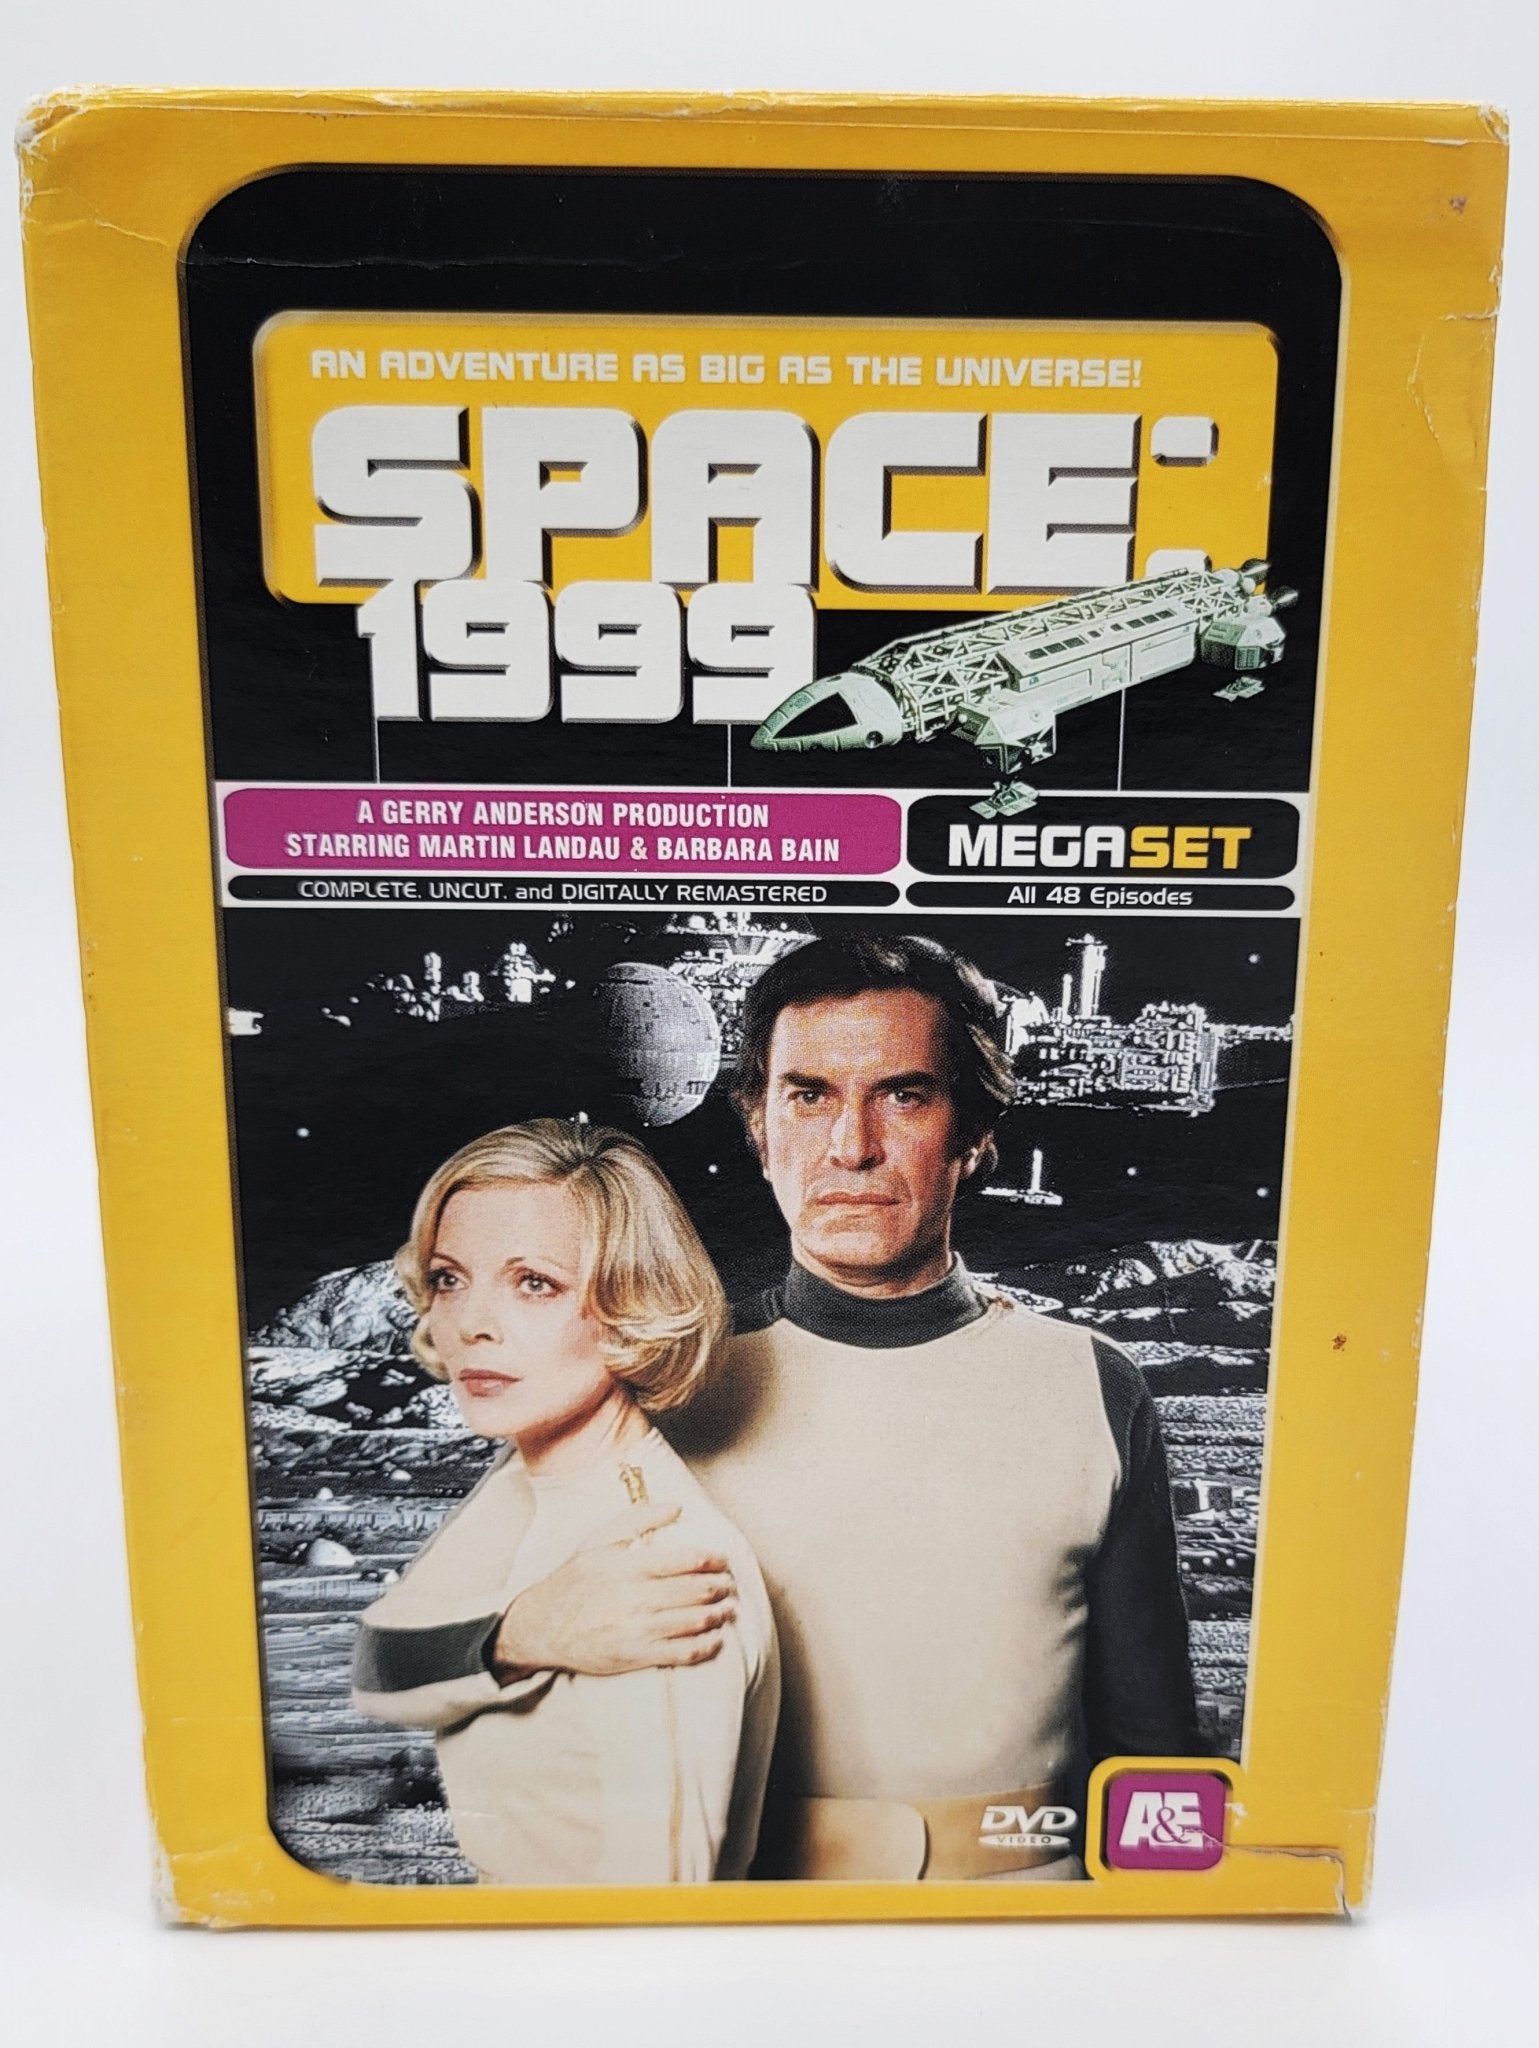 A&E - Space 1999 Mega Set all 48 Episodes | Complete Uncut & Digitally Remastered | DVD - DVD - Steady Bunny Shop